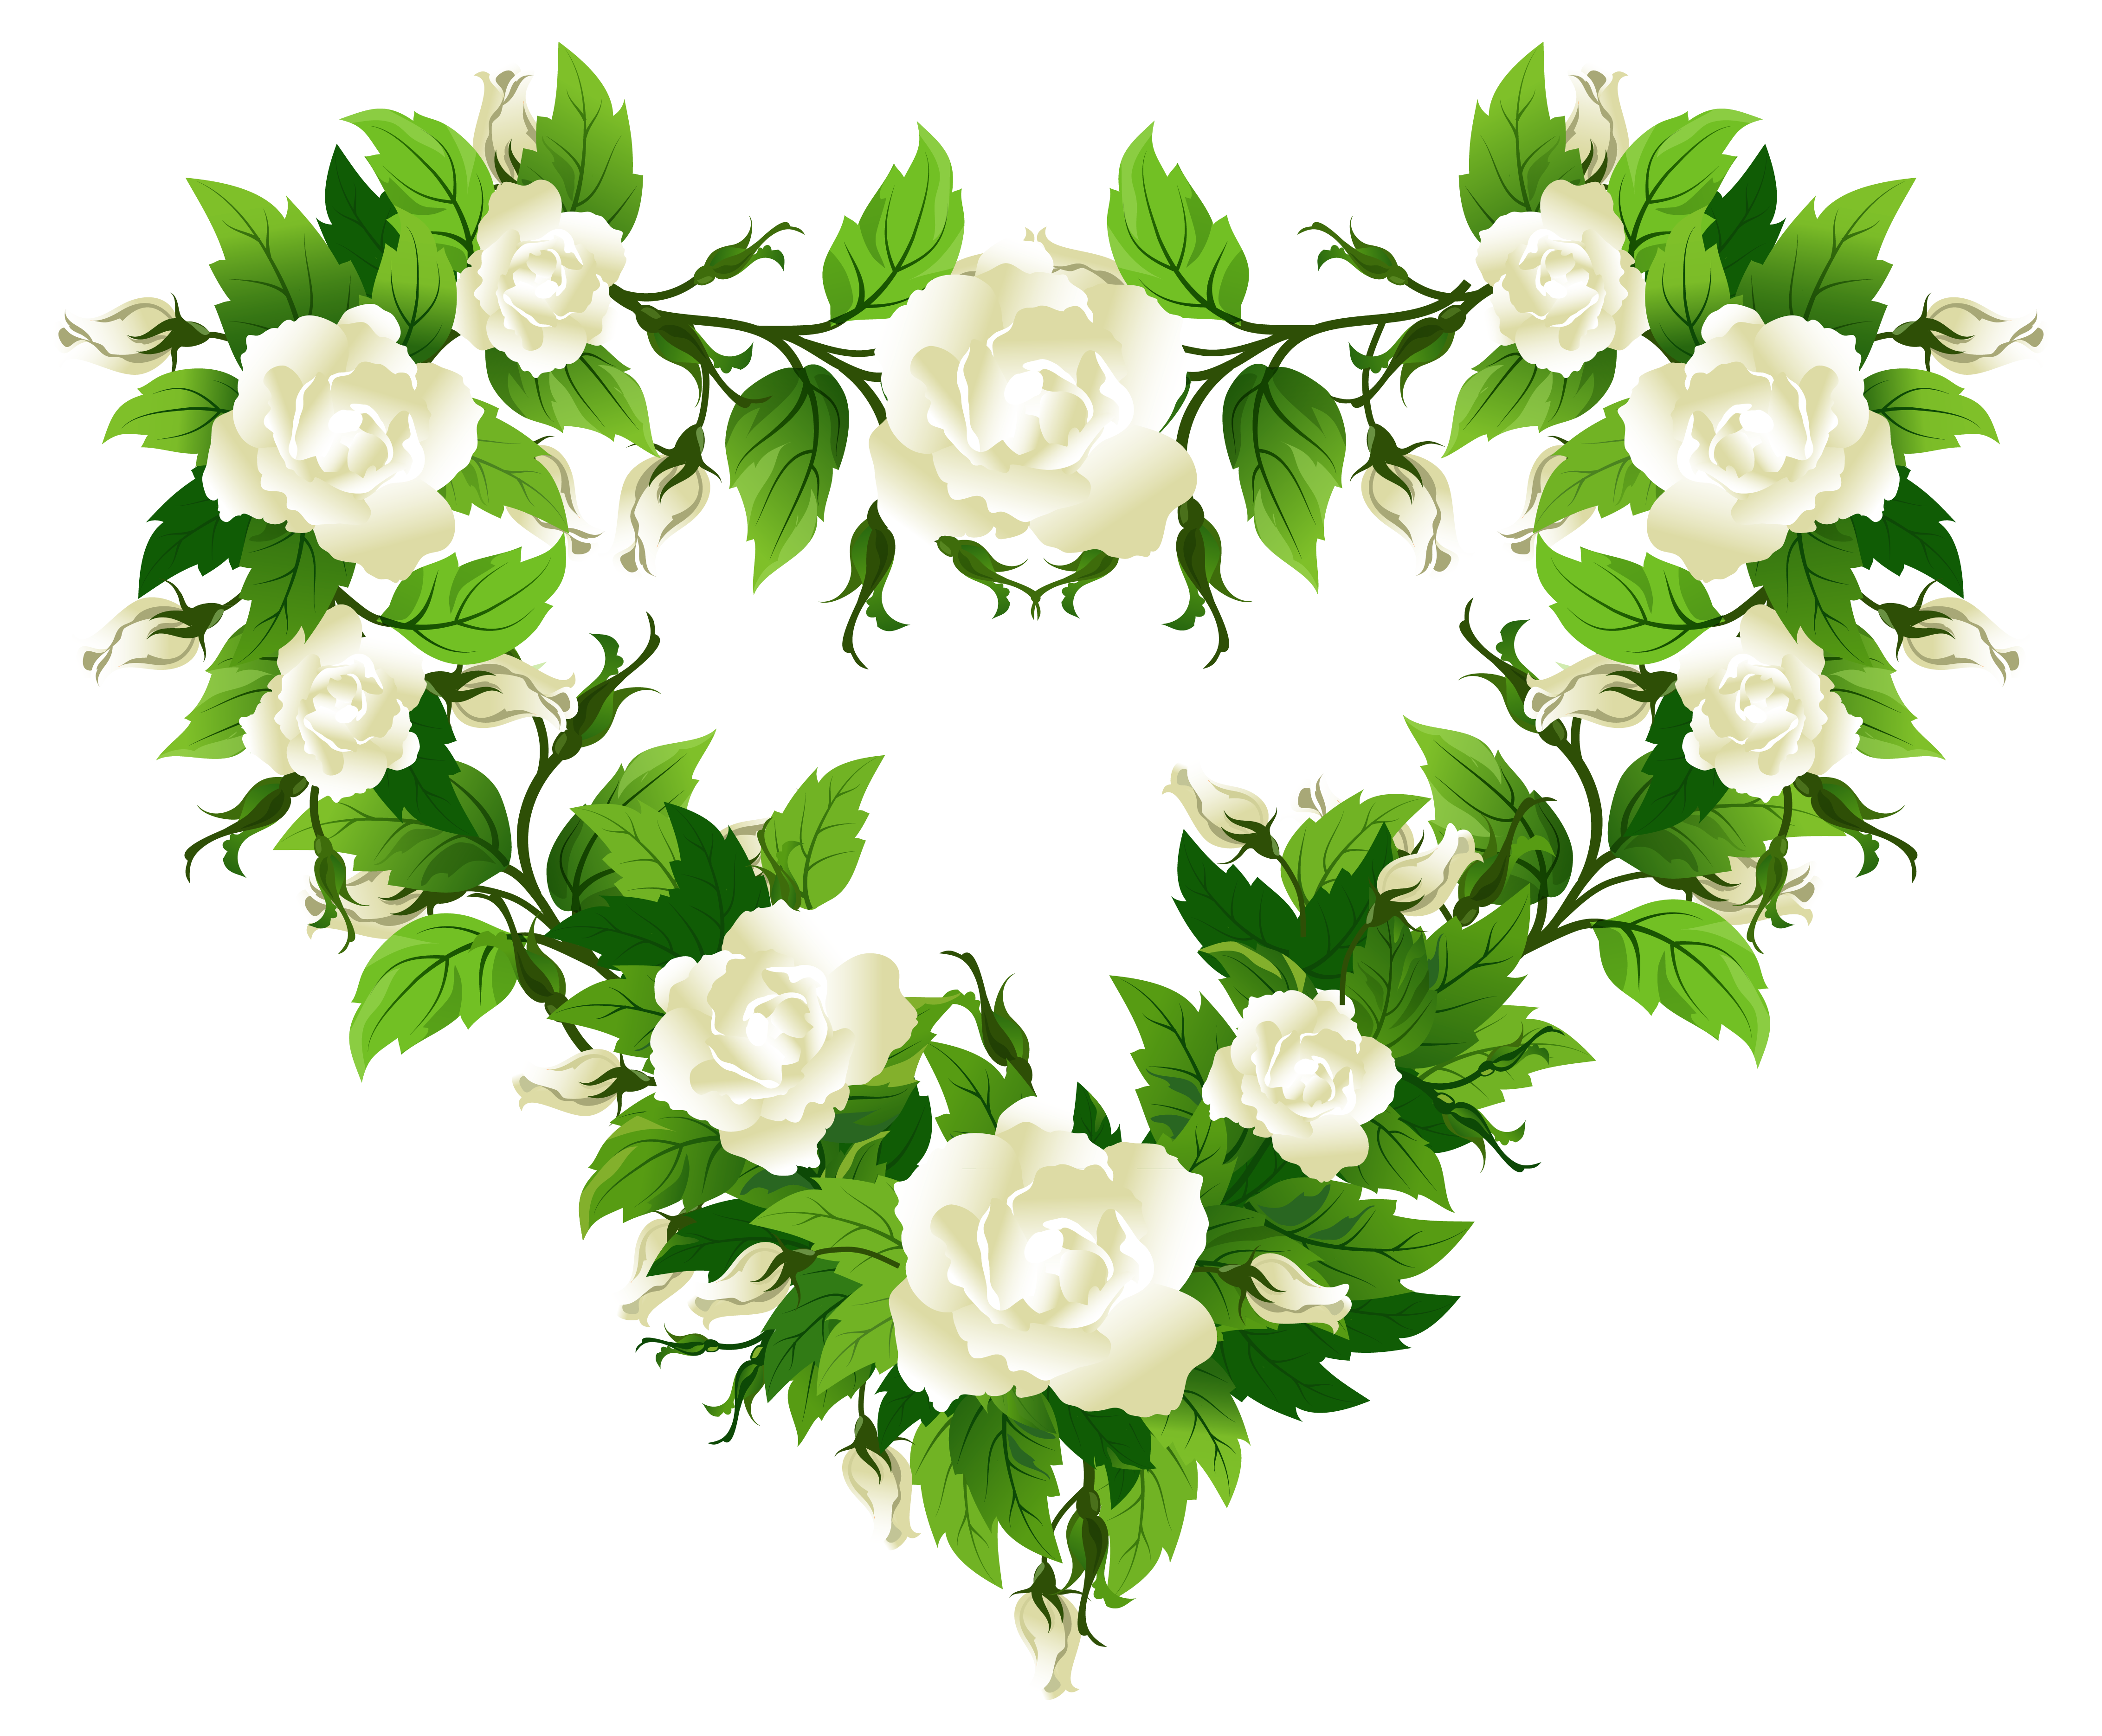 White Roses Heart Decor PNG Clipart Picture